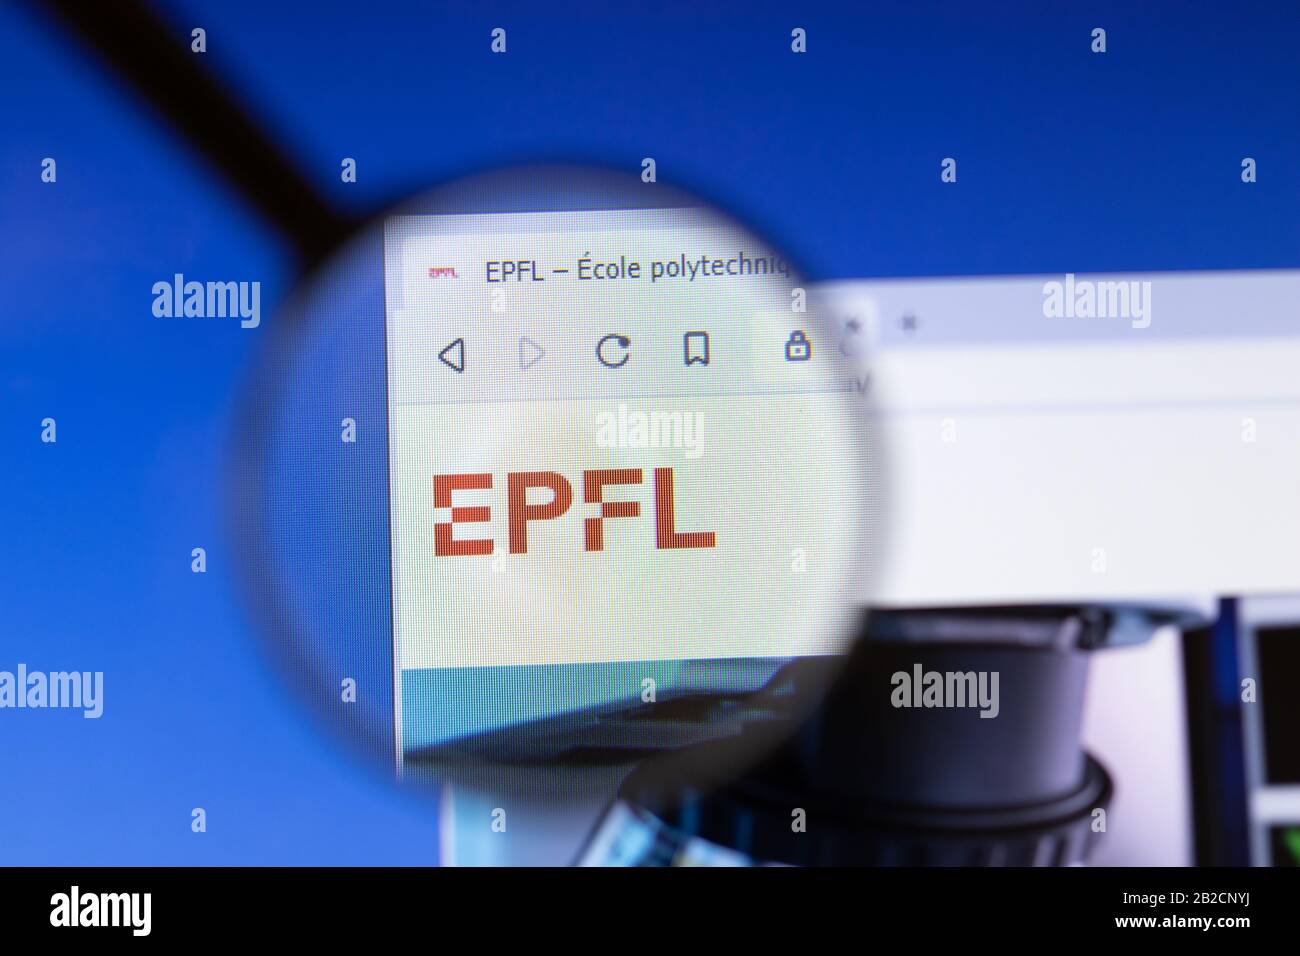 Los Angeles, California, USA - 3 March 2020: EPFL Ecole Polytechnique Federale de Lausanne website homepage logo visible on display screen Stock Photo